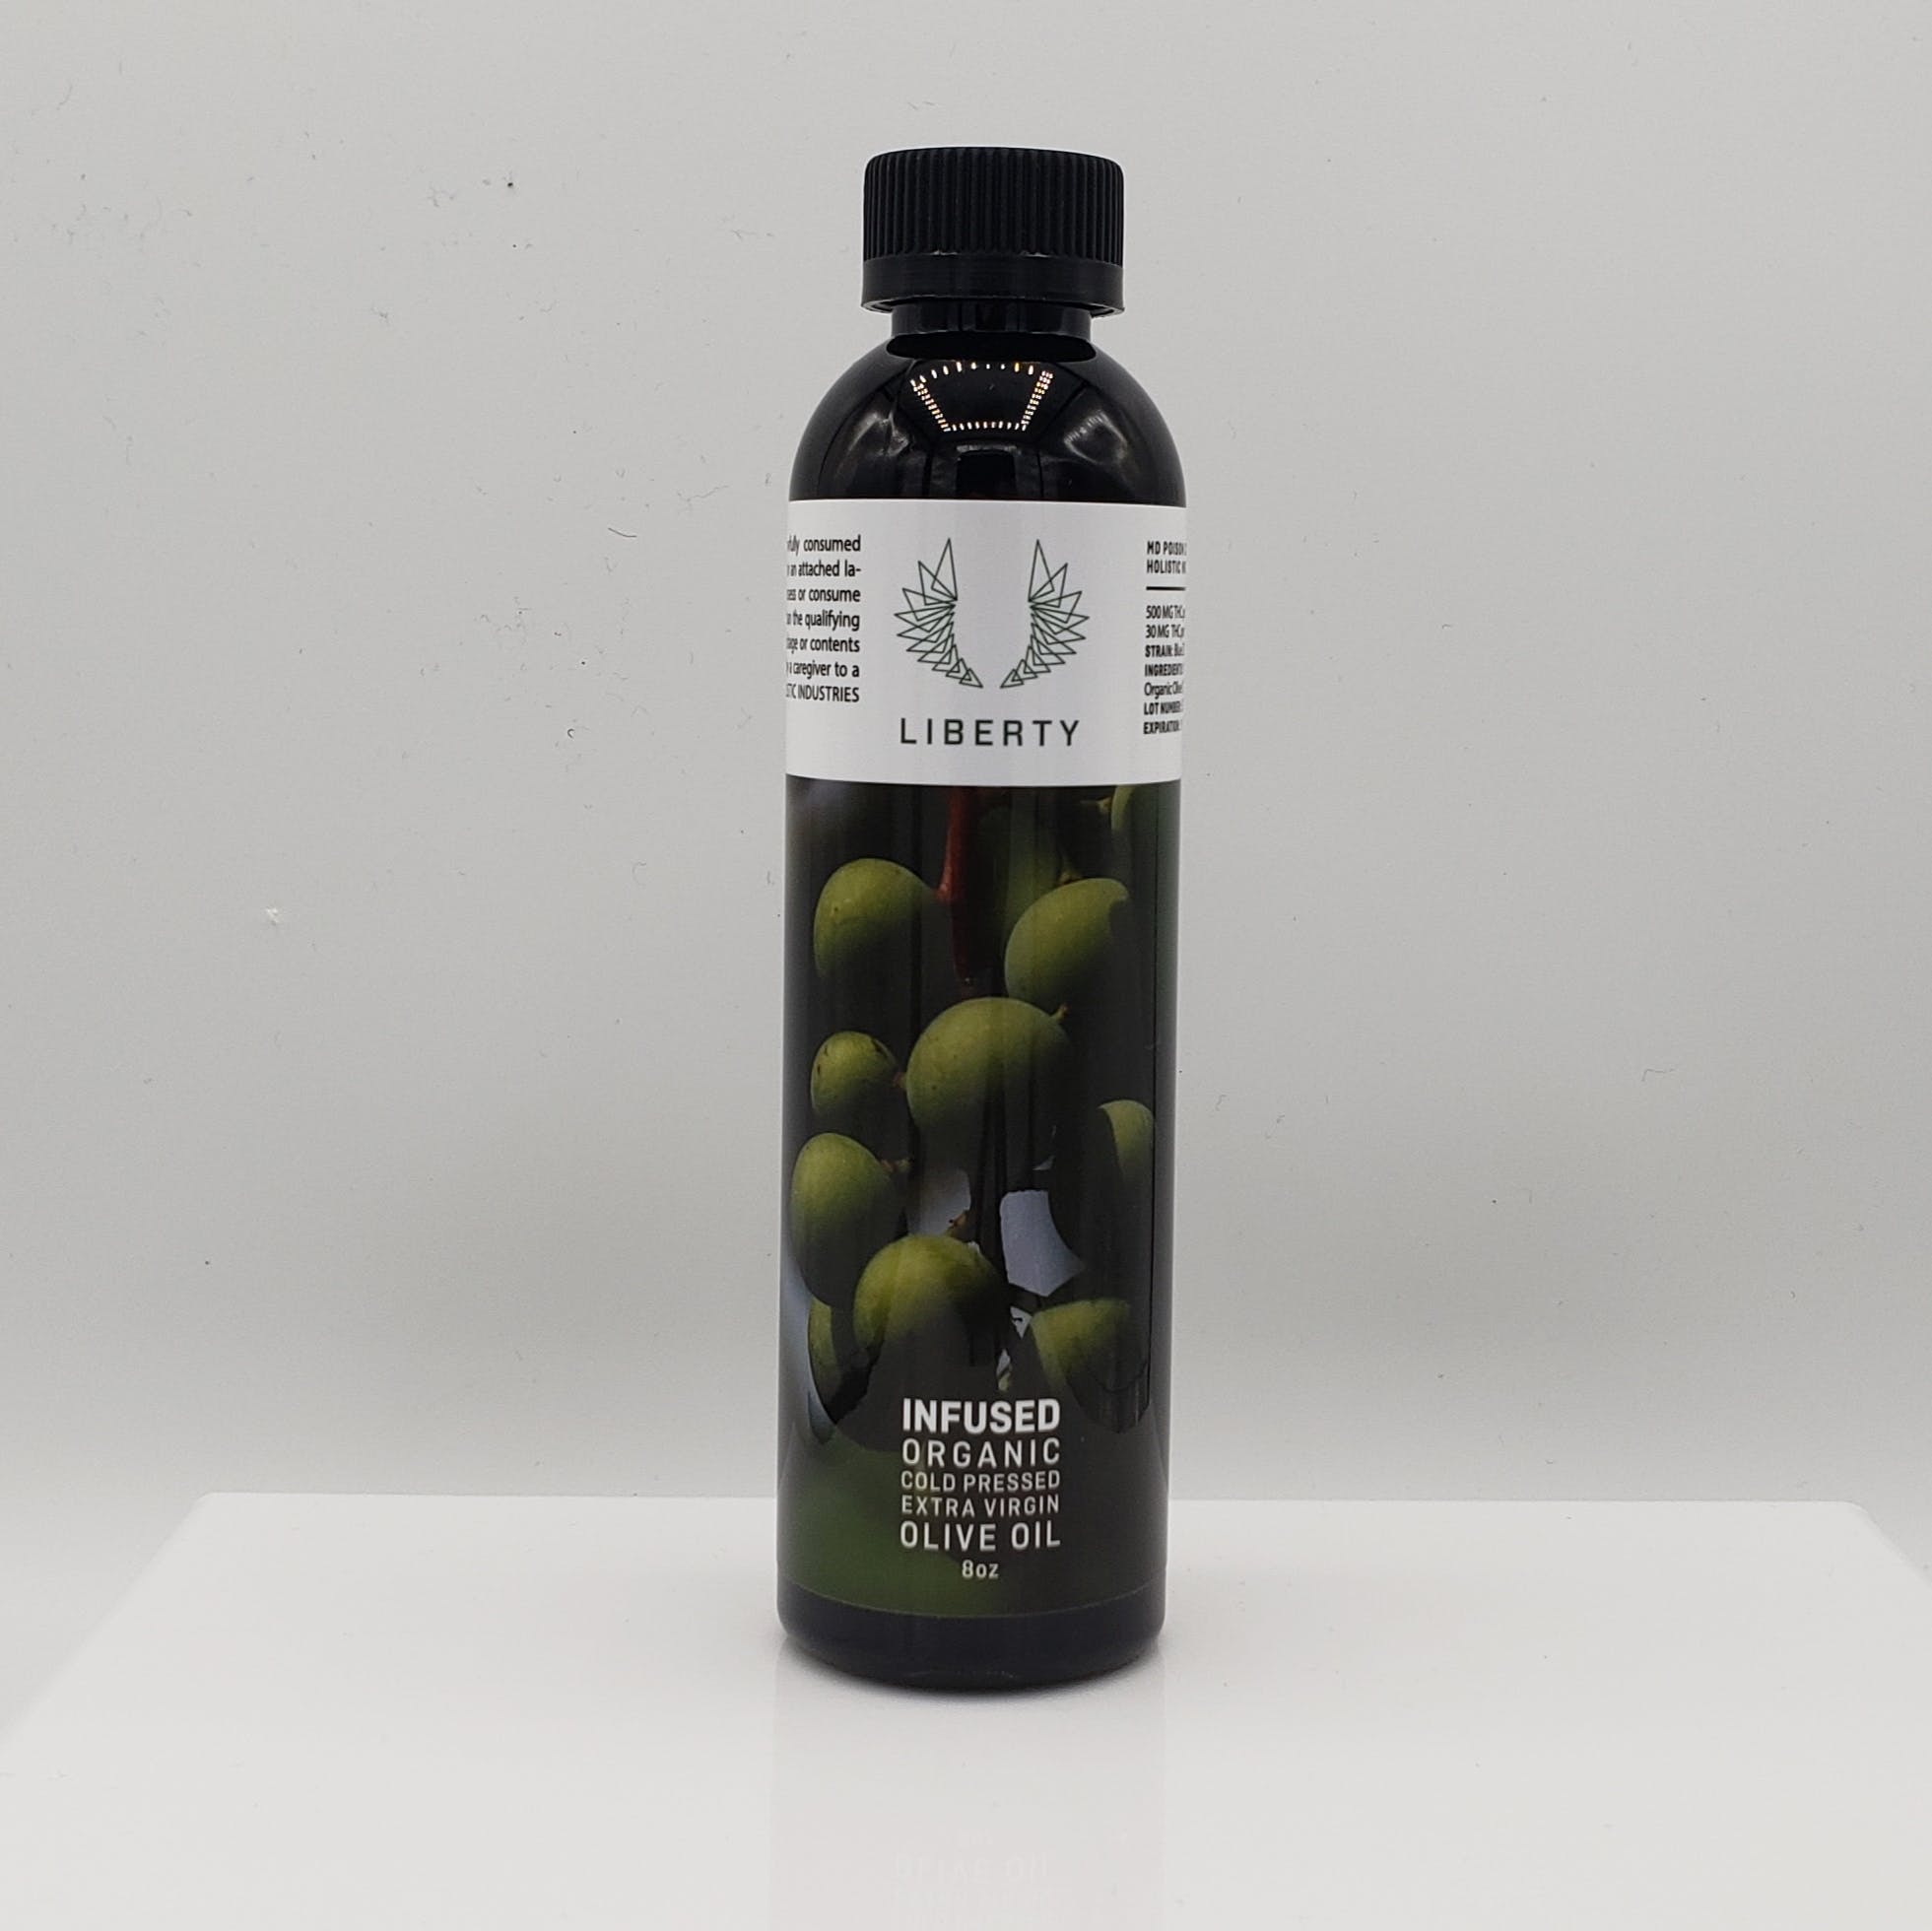 Liberty Infused Organic Cold Pressed Extra Virgin Olive Oil